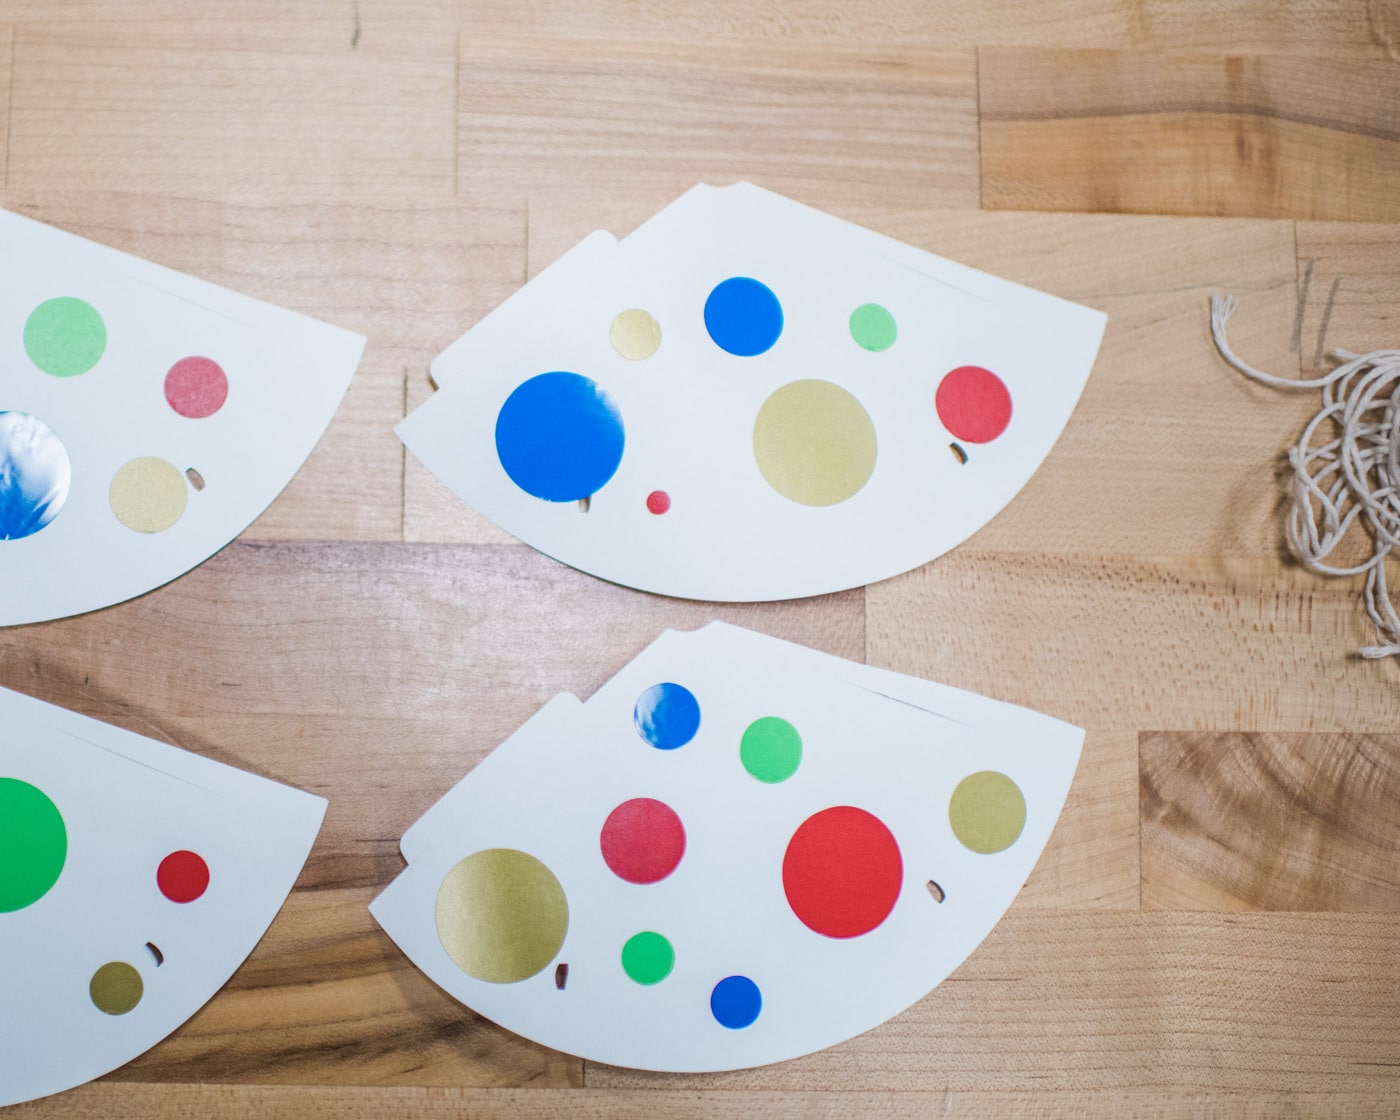 Party hats with polka dots